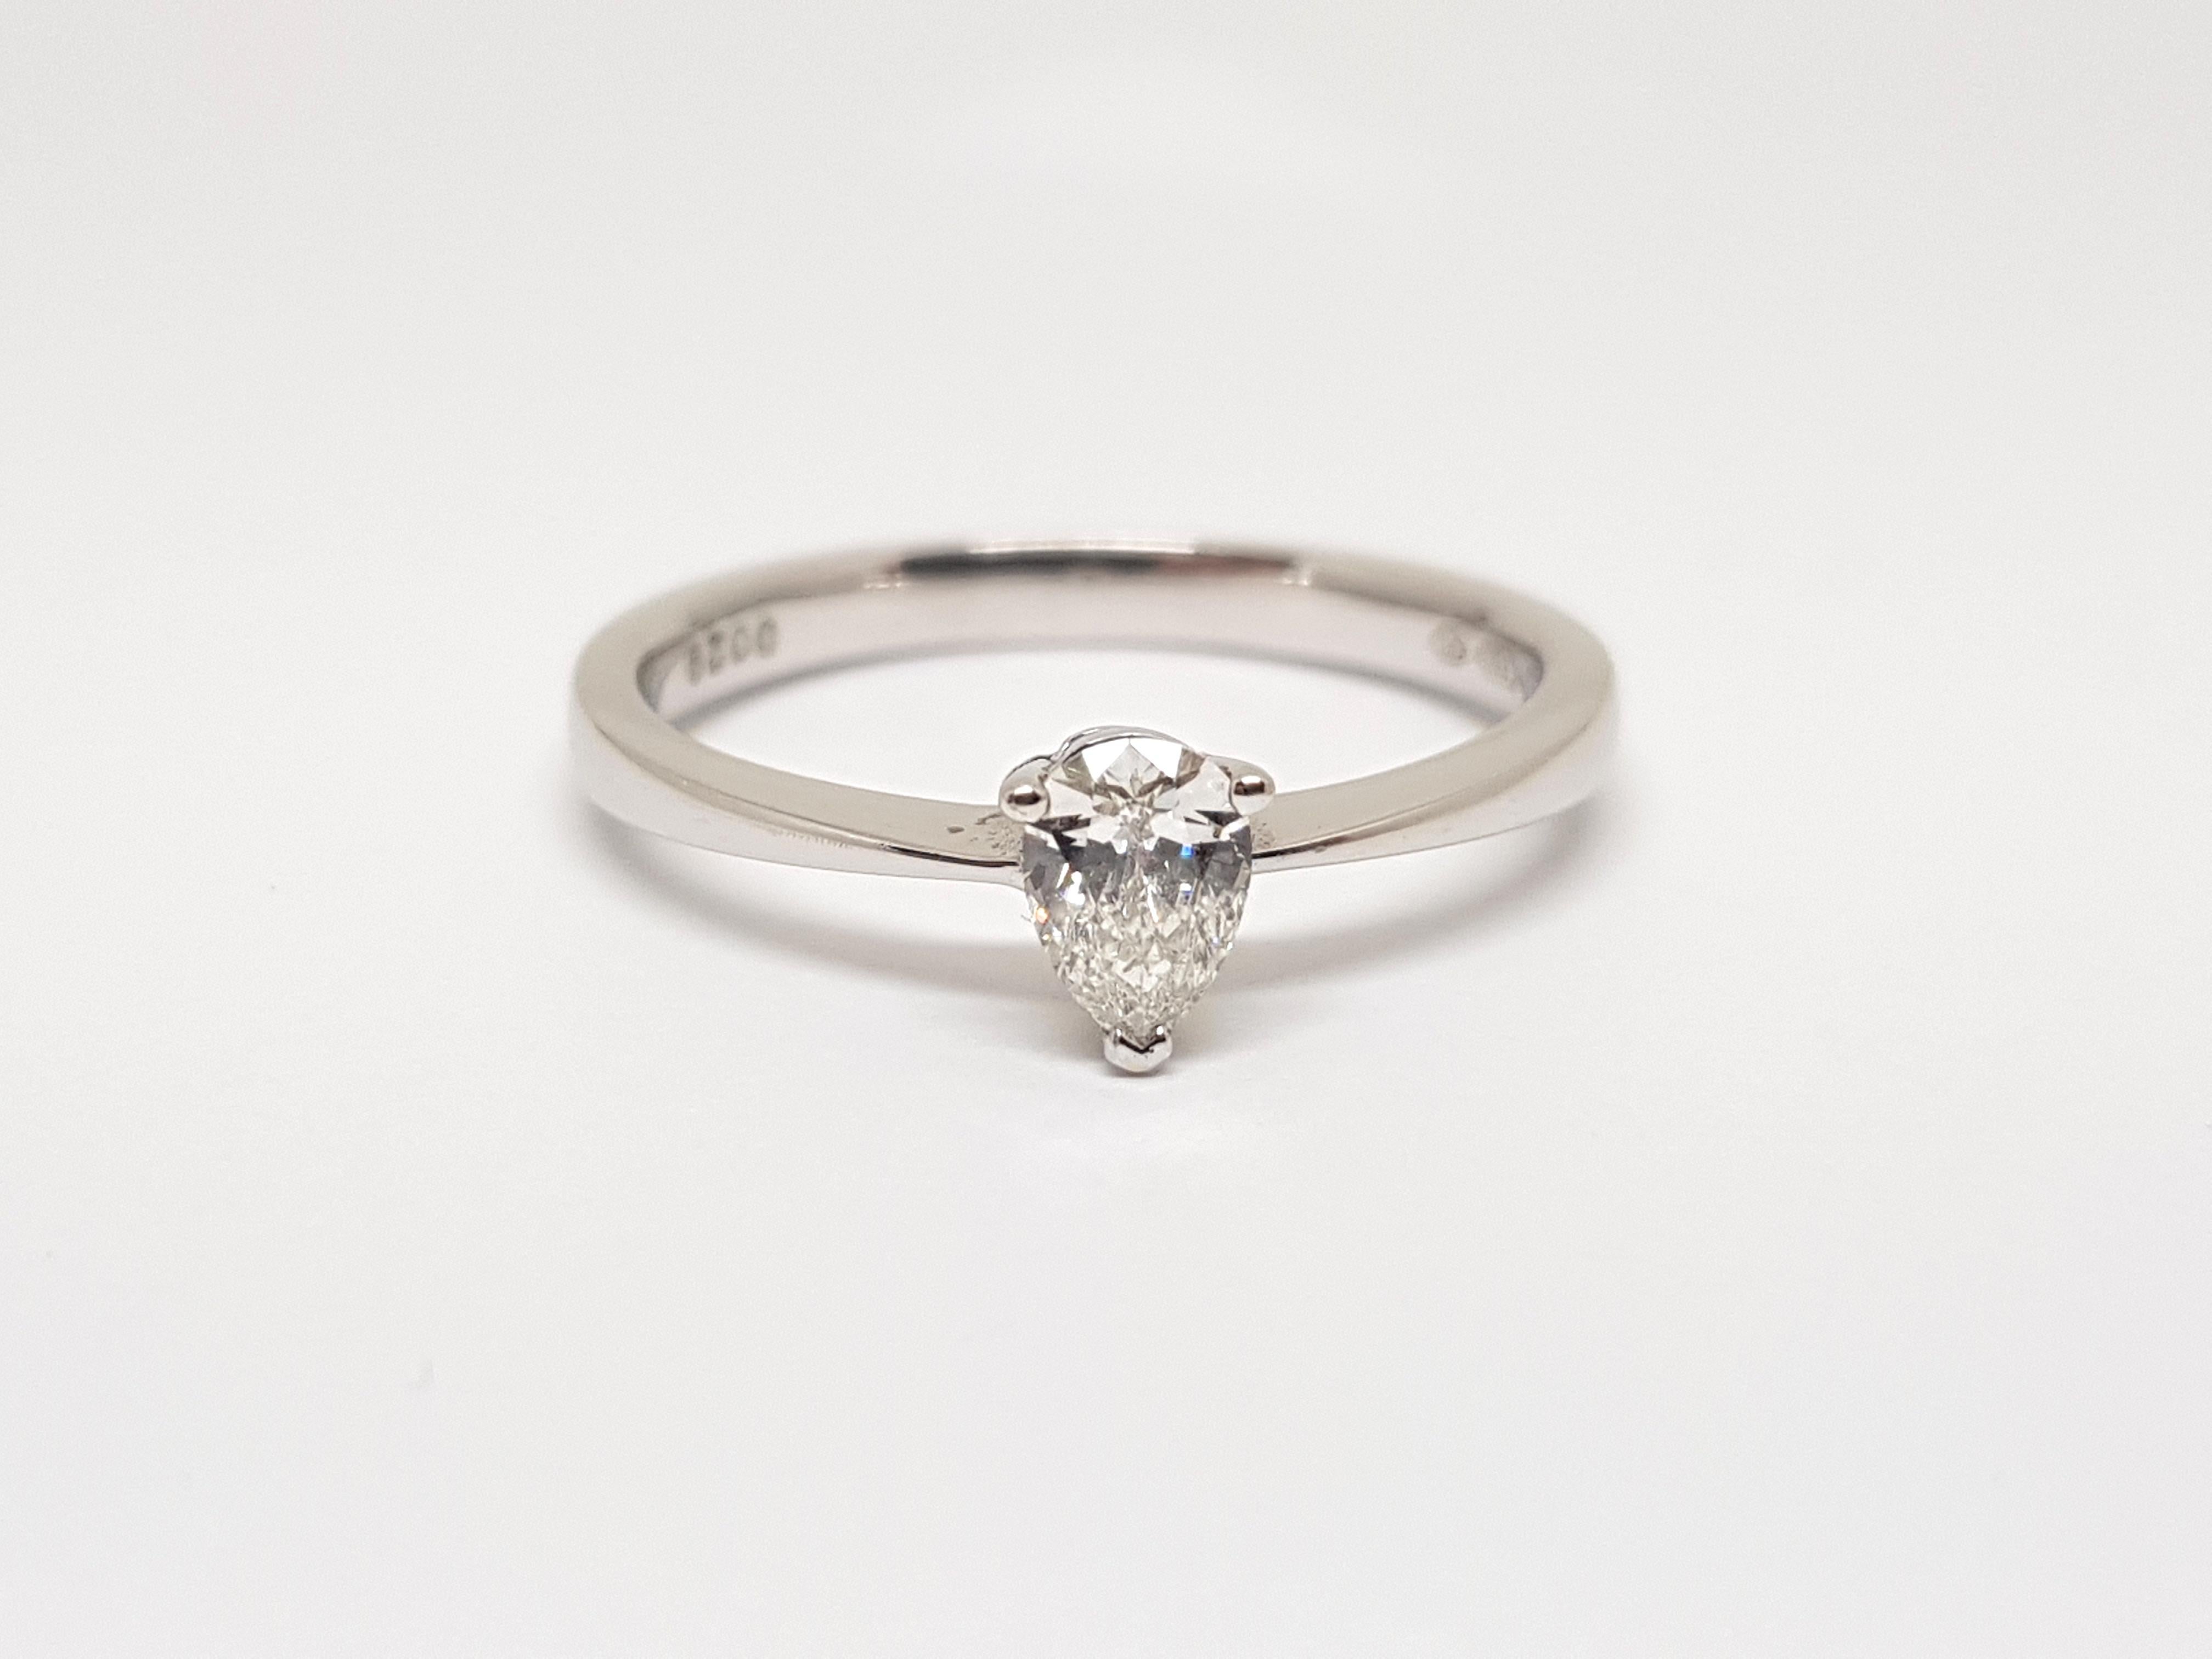 Gold: 18K White Gold. 
Weight: 2,50 gr. 
Diamonds: 0,40ct. F / VS Pear Shape 
Width: 0,6 cm 
Ringsize: 53 / 16,75mm 
Free resizing of ring up to size 70 / 22mm 
Shipping: free worldwide insured shipping 
All our jewellery comes with a certificate